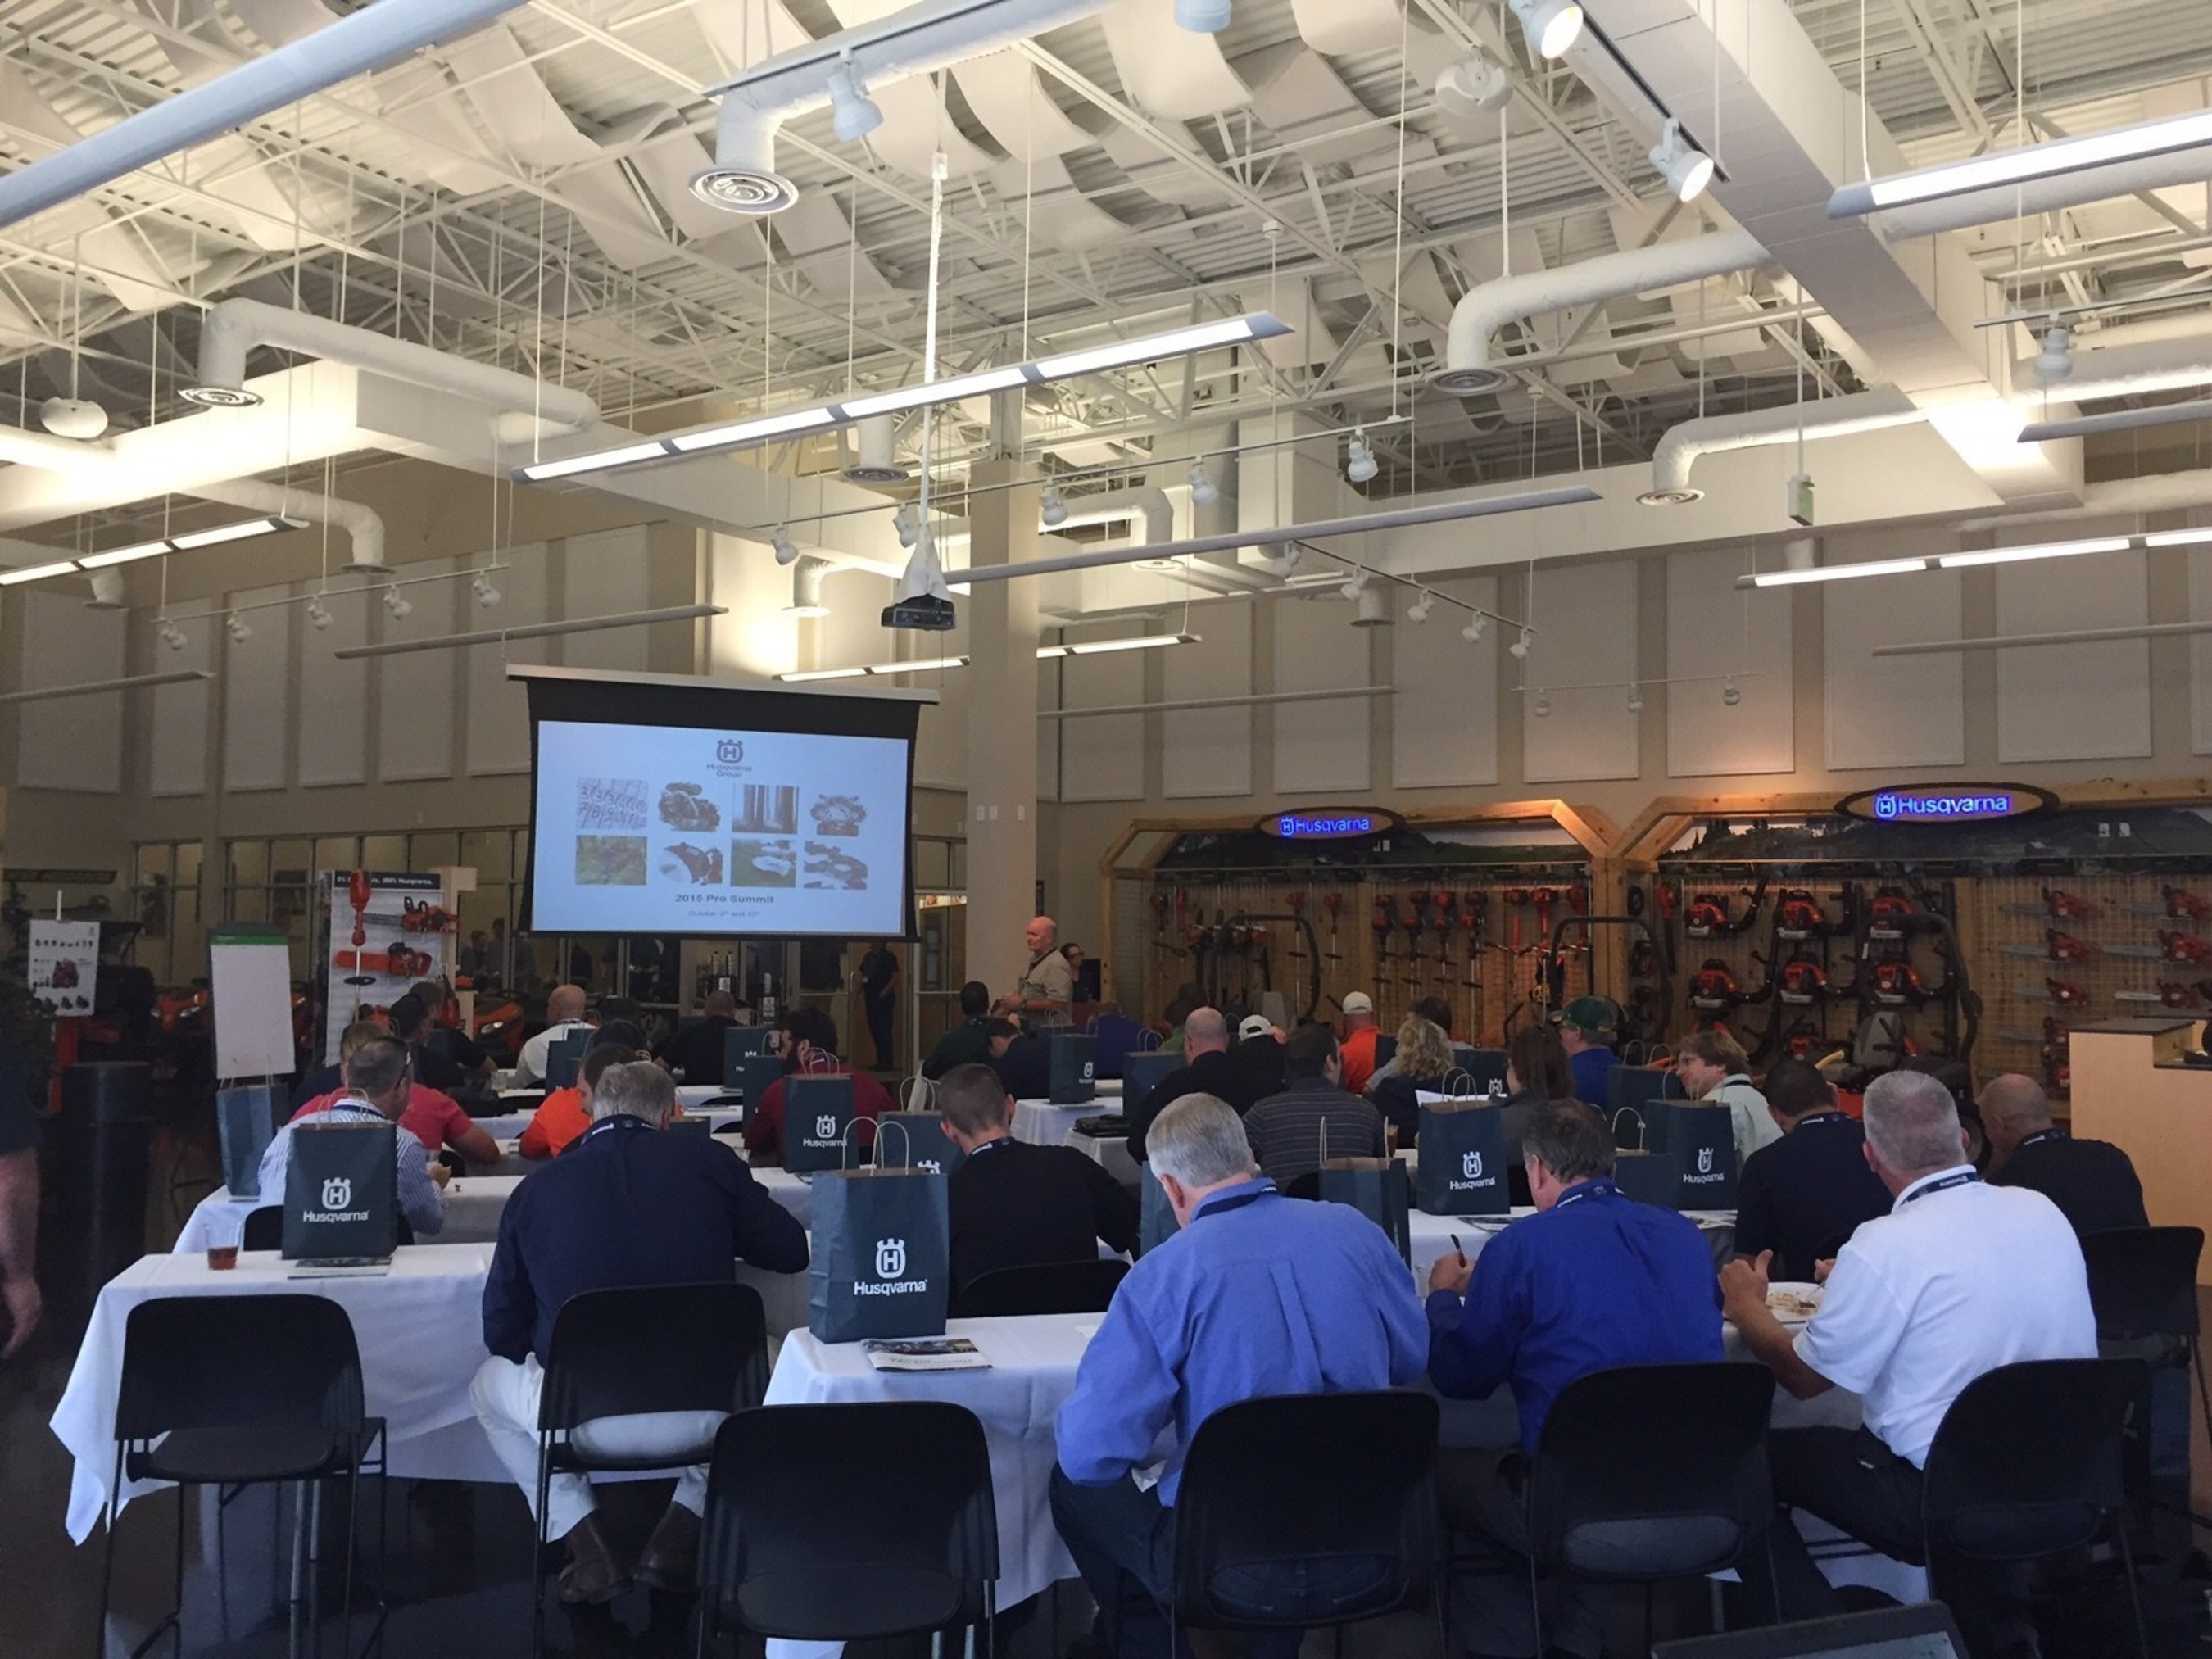 Husqvarna hosts summit for commercial customers where valued customers convene at its Charlotte headquarters for exclusive product demonstrations and insightful industry dialogue.